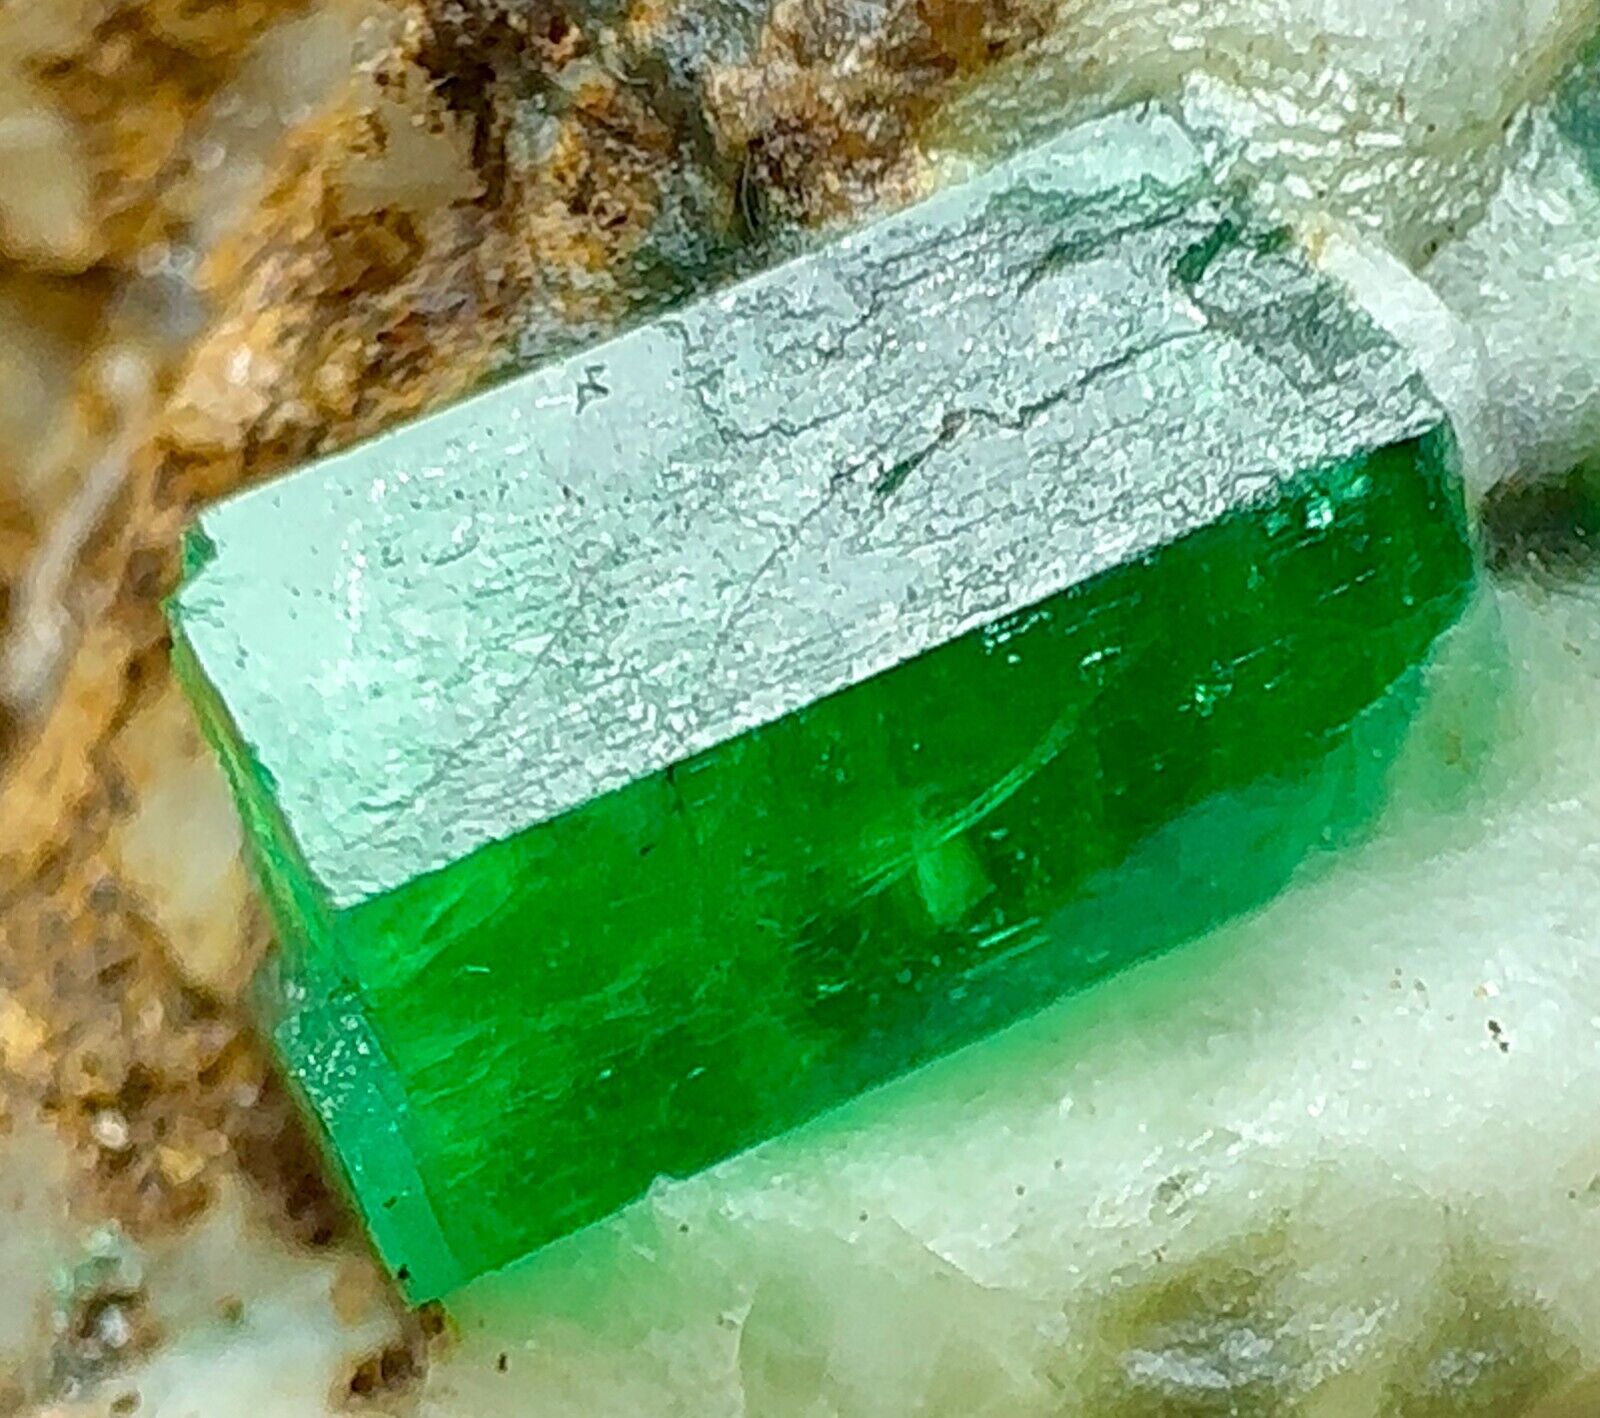 94 Ct Wow High Quality Top Green Swat Emerald Huge Crystals On Matrix @PAK